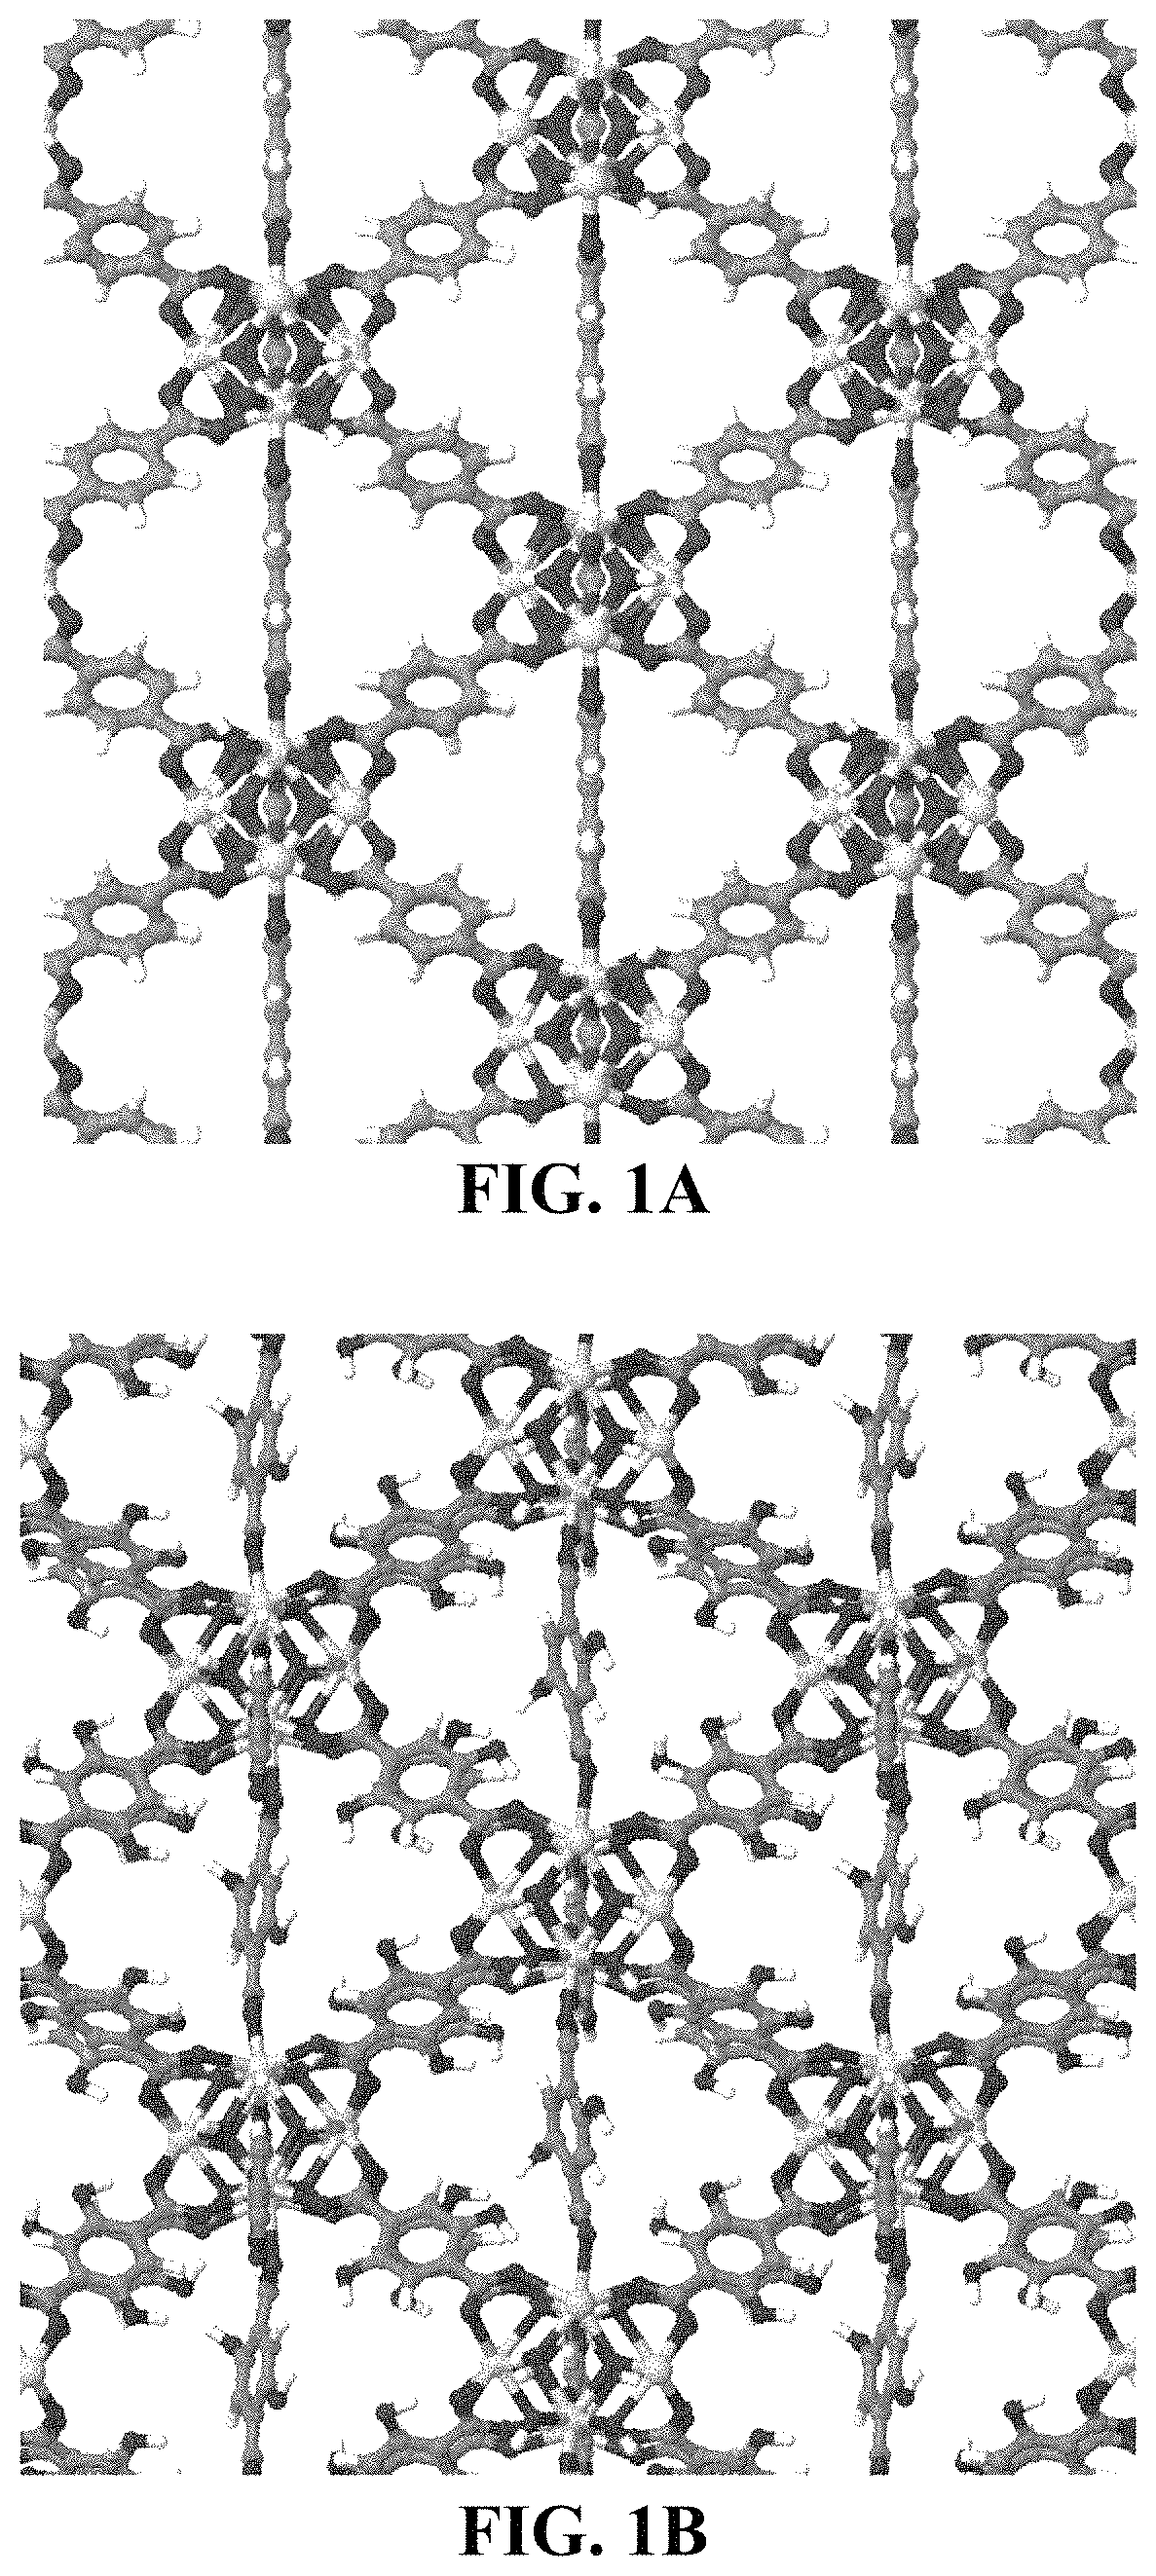 Degradation of chemical agents using metal-organic framework compositions